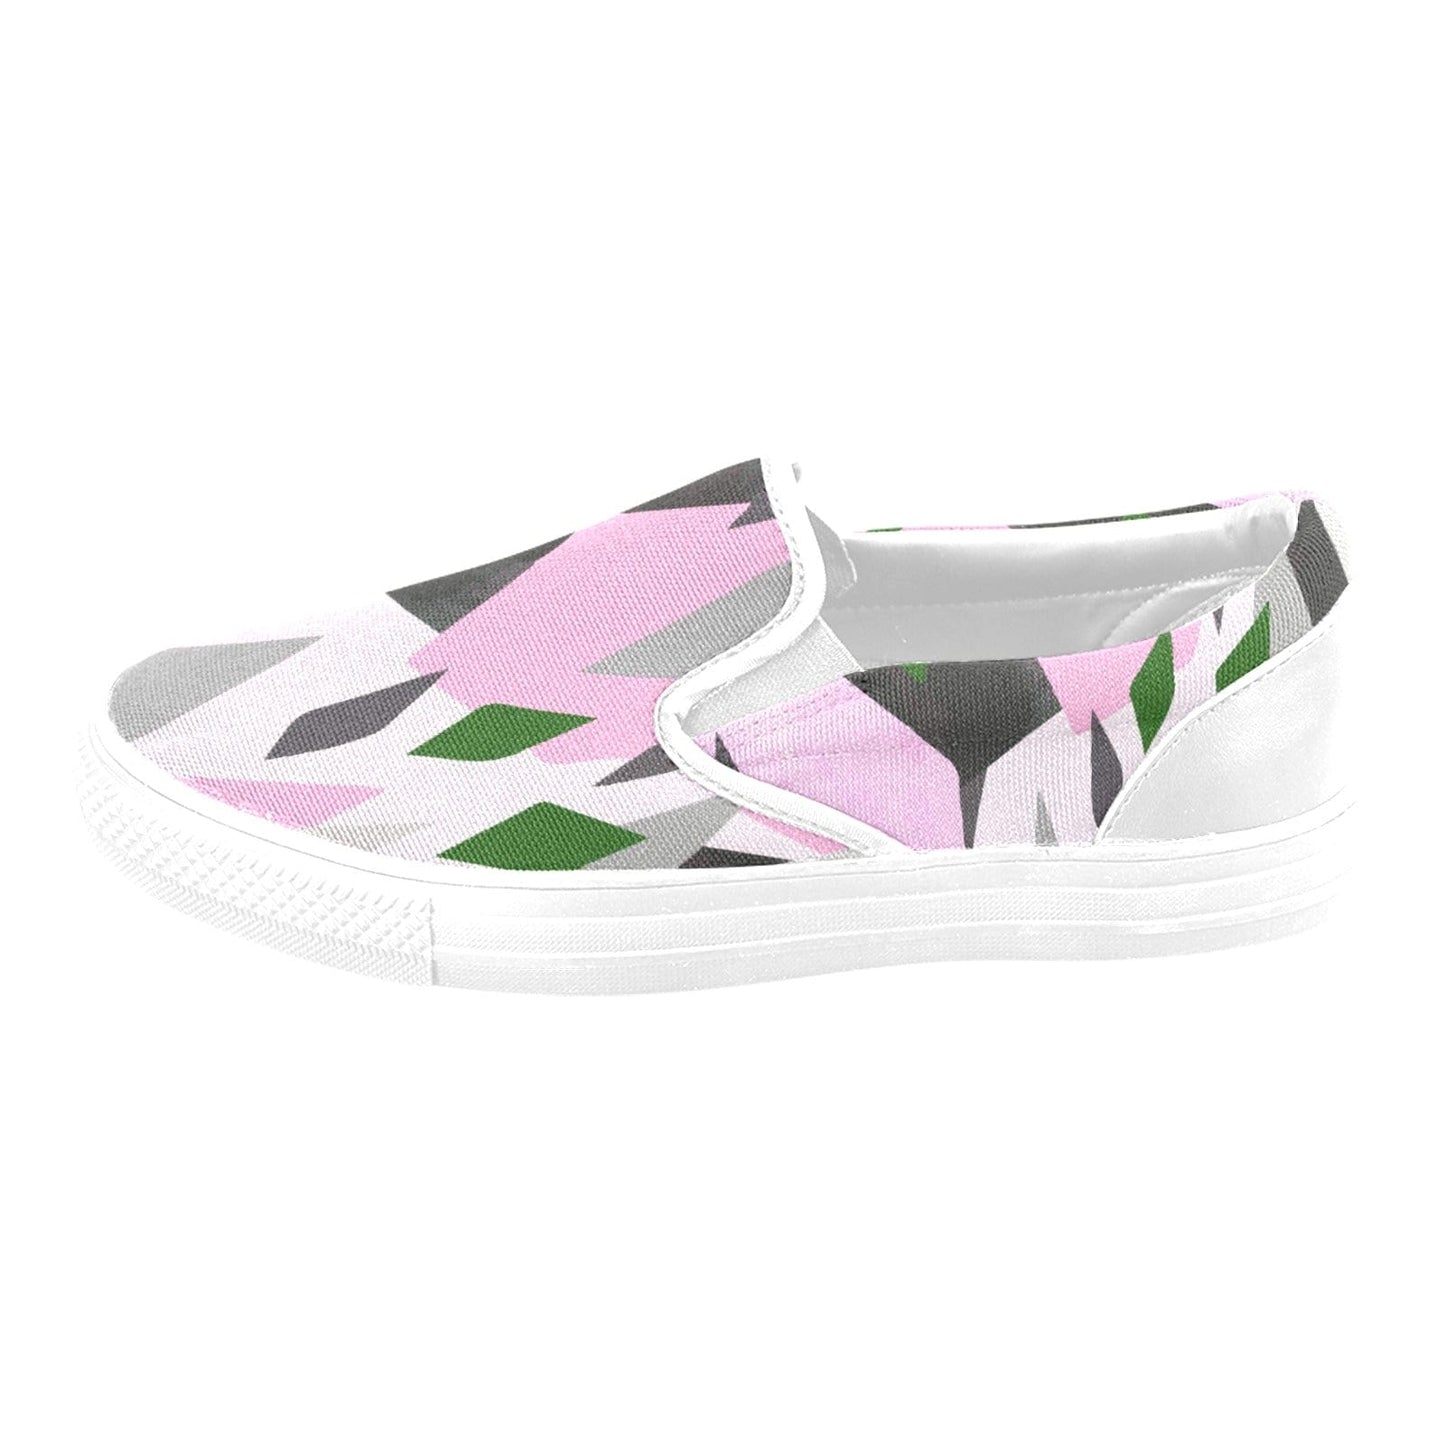 Slip-on Canvas Men's Shoes (Model019)(Two Shoes With Different Printing) - CLASSY CLOSET BOUTIQUE